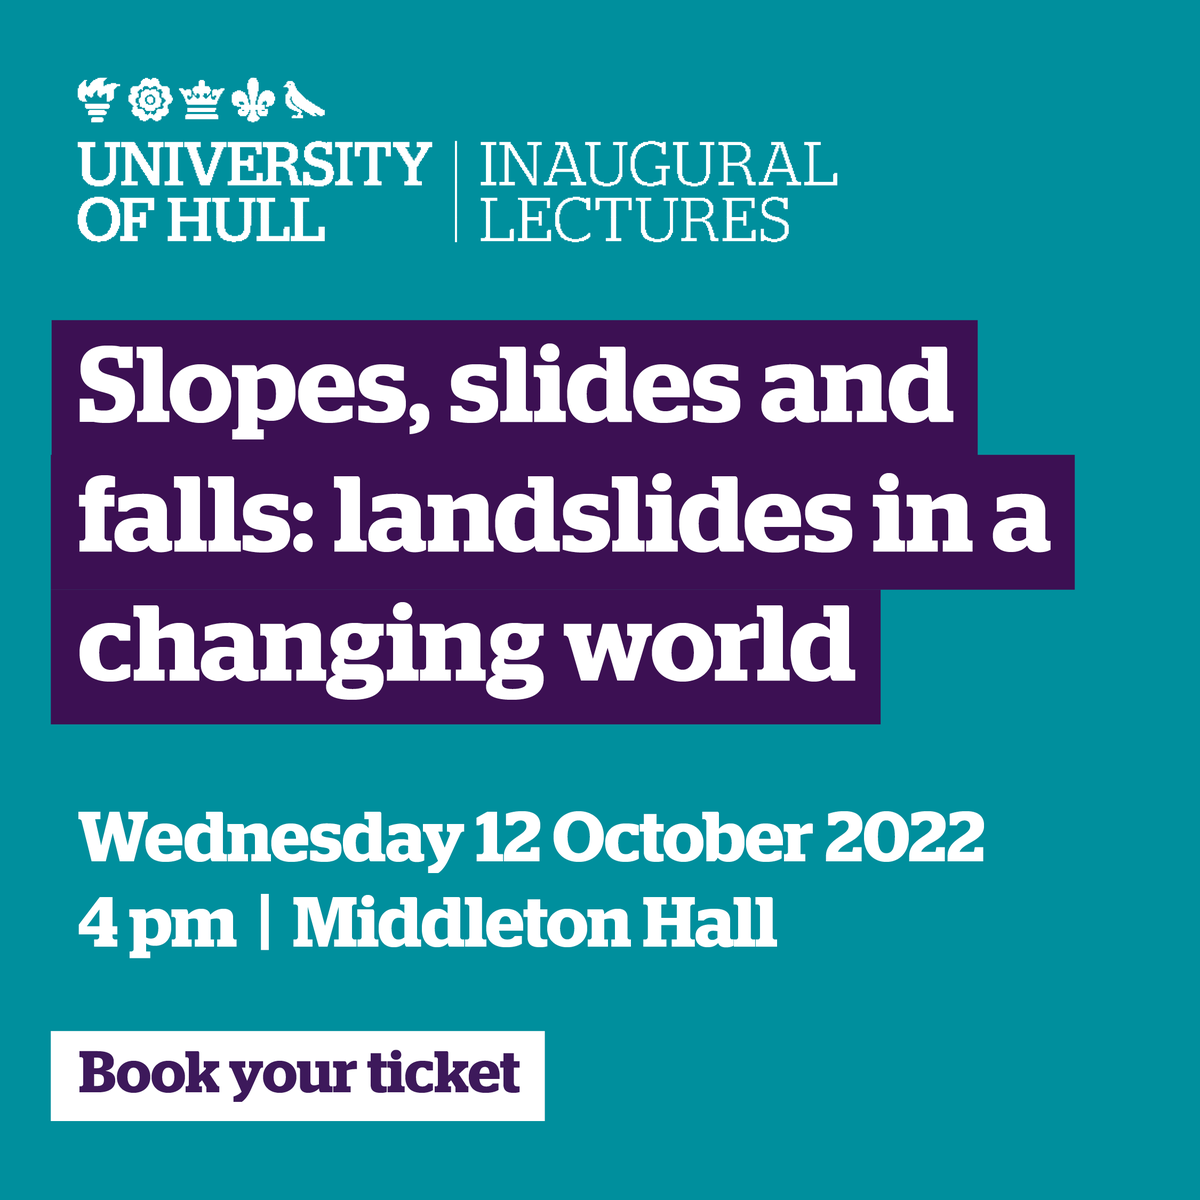 I'm really looking forward to welcoming guests, students colleagues, friends and family members to my inaugural lecture at @UniOfHull this afternoon. It is a huge honour to have the opportunity to talk about landslides, a topic of which I remain deeply passionate.